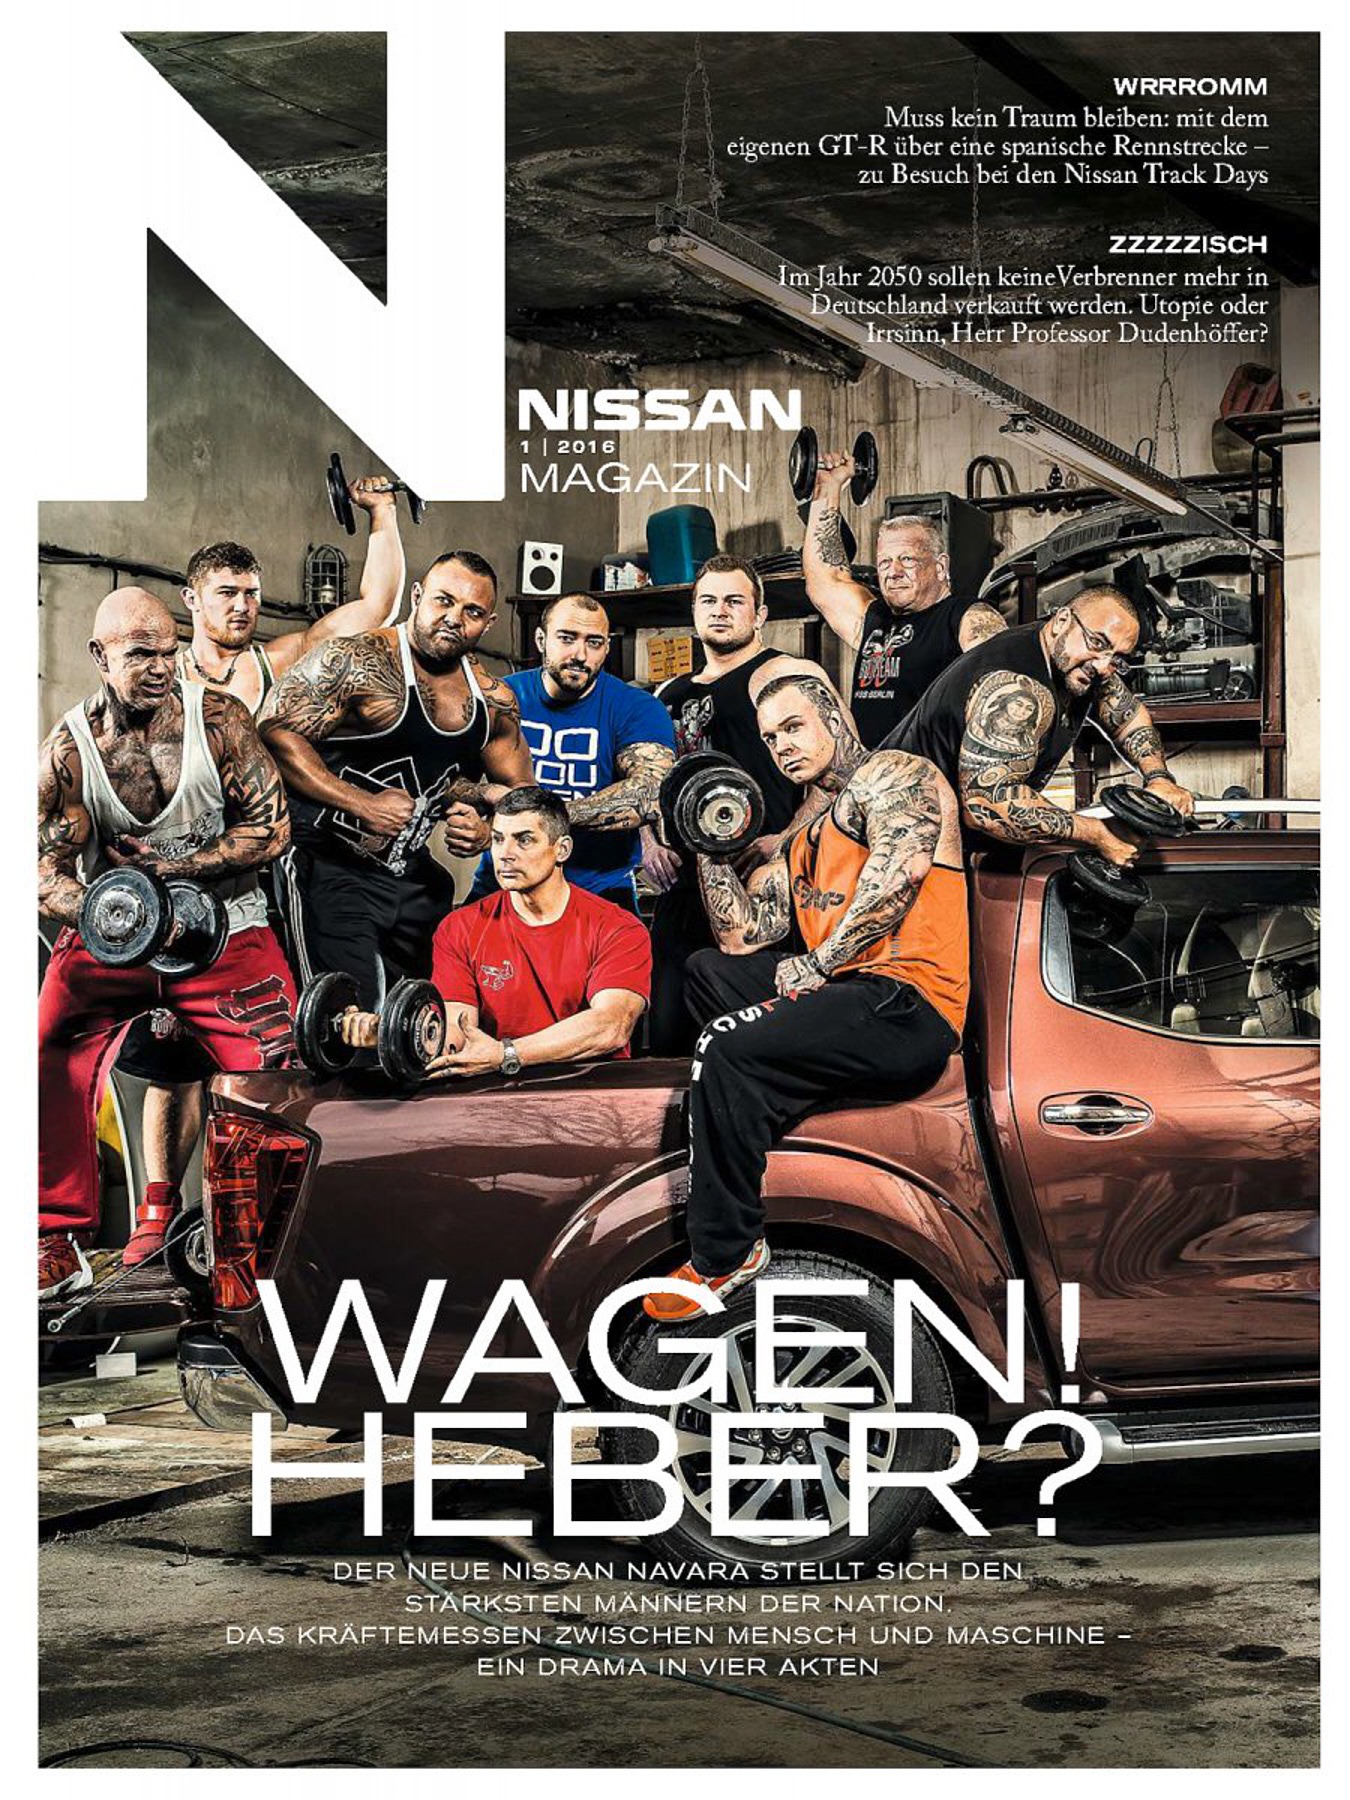 nissan magazin wagenheber coverstory (7 images) by Mike Meyer Photography